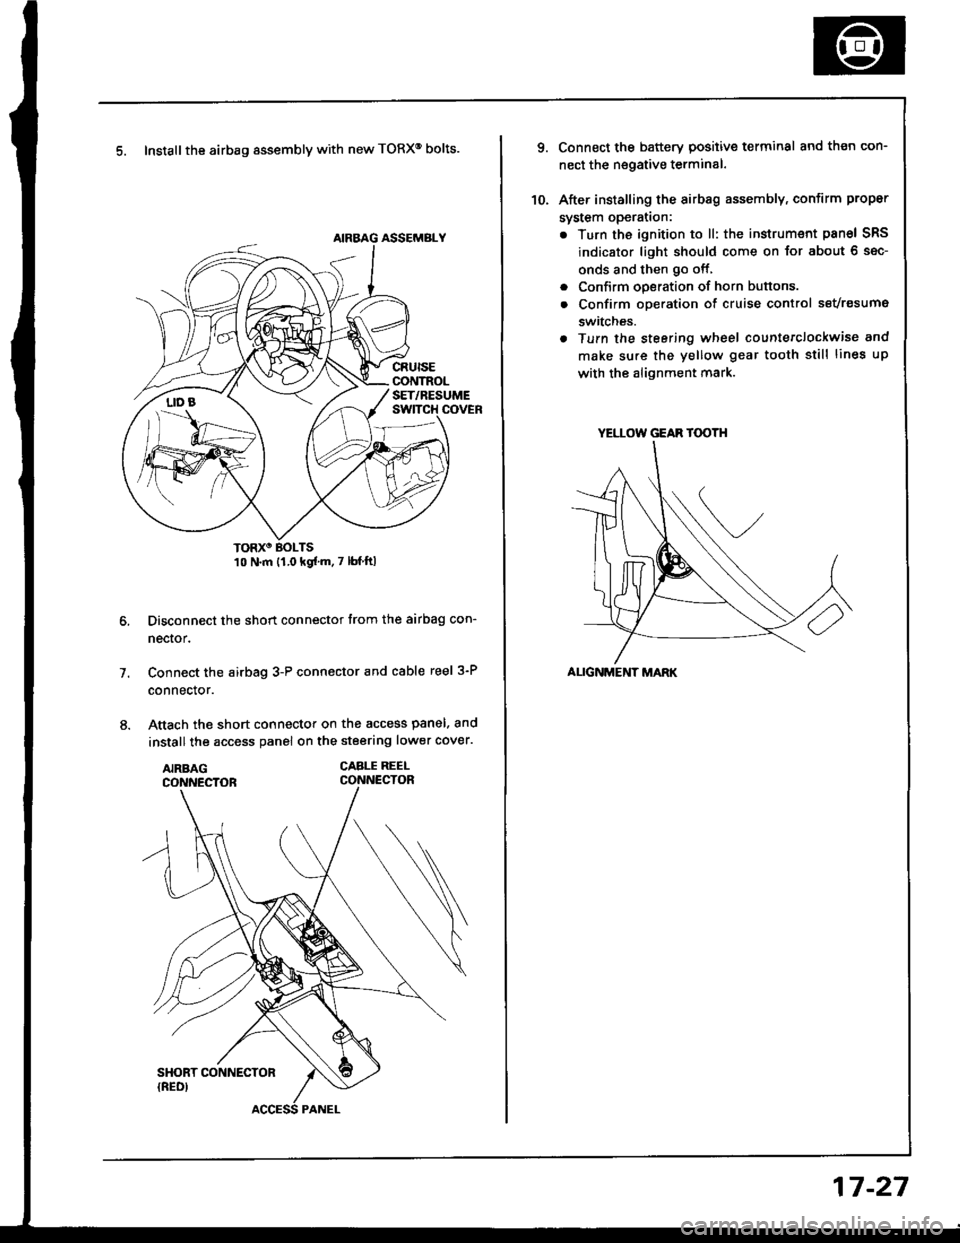 HONDA INTEGRA 1994 4.G Workshop Manual 5. Install the airbag assembly with new TORXo bolts.
TORXO BOLTS10 N.m {1.0 kgfm.7 lbf ftl
Disconnect the short connector trom the airbag con-
nector.
Connect the airbag 3-P connector and cable reel 